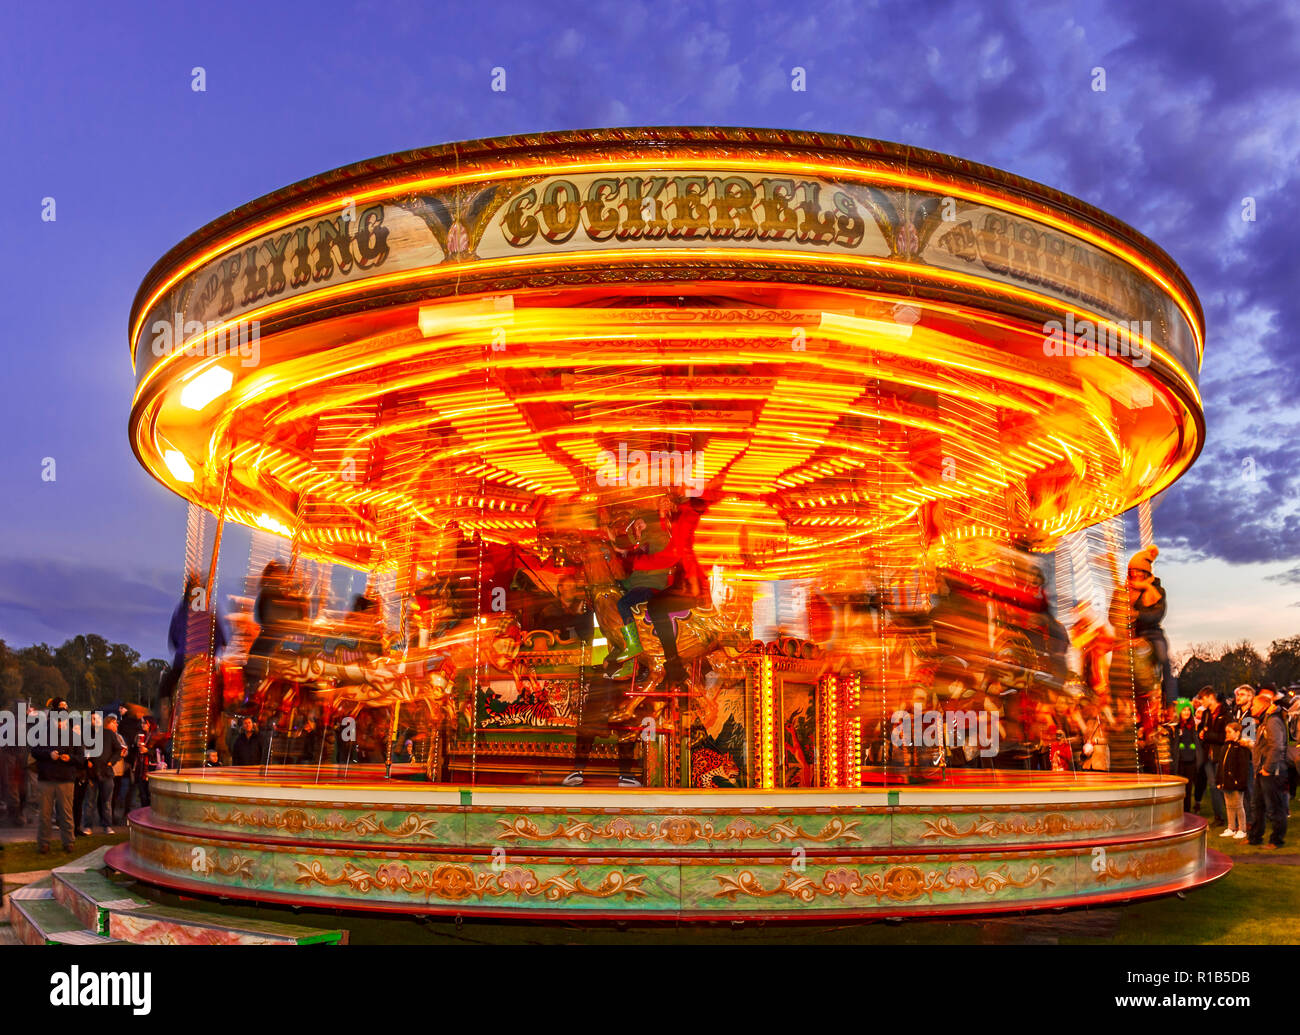 Carousel roundabout, or merry go round at a fun fair. Stock Photo